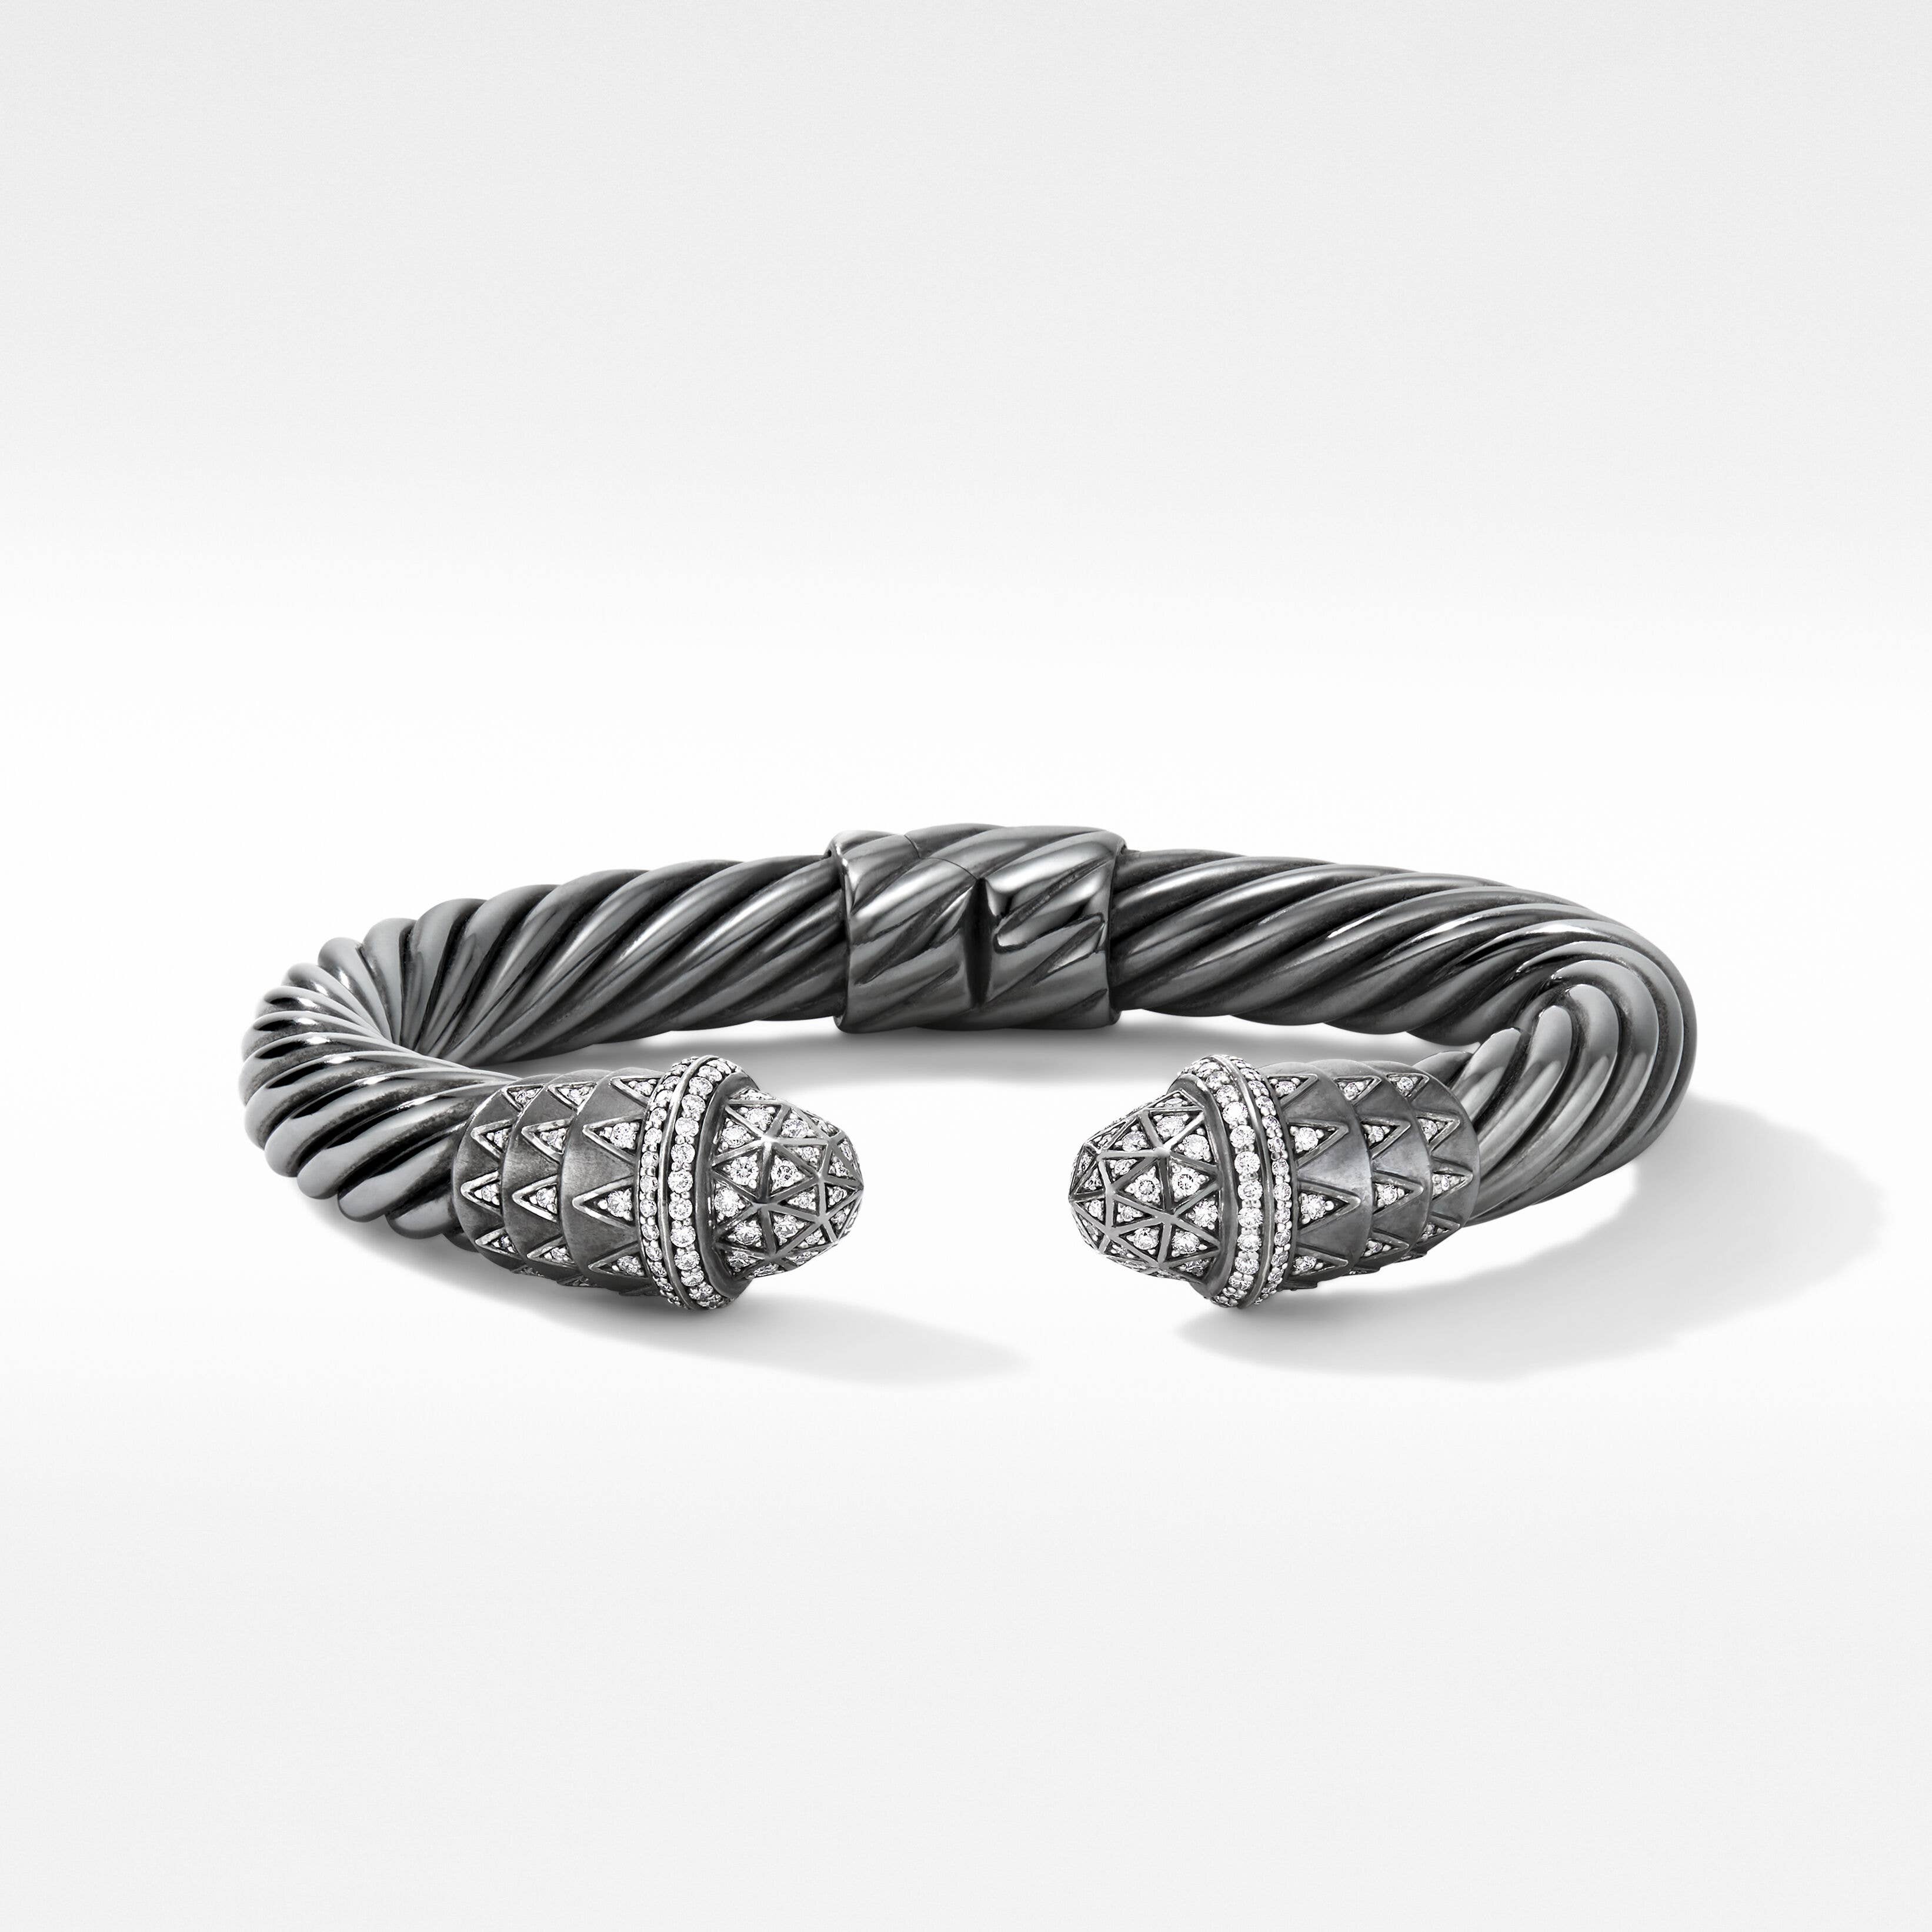 Cable Deco Bracelet in Blackened Silver with Pavé Diamonds